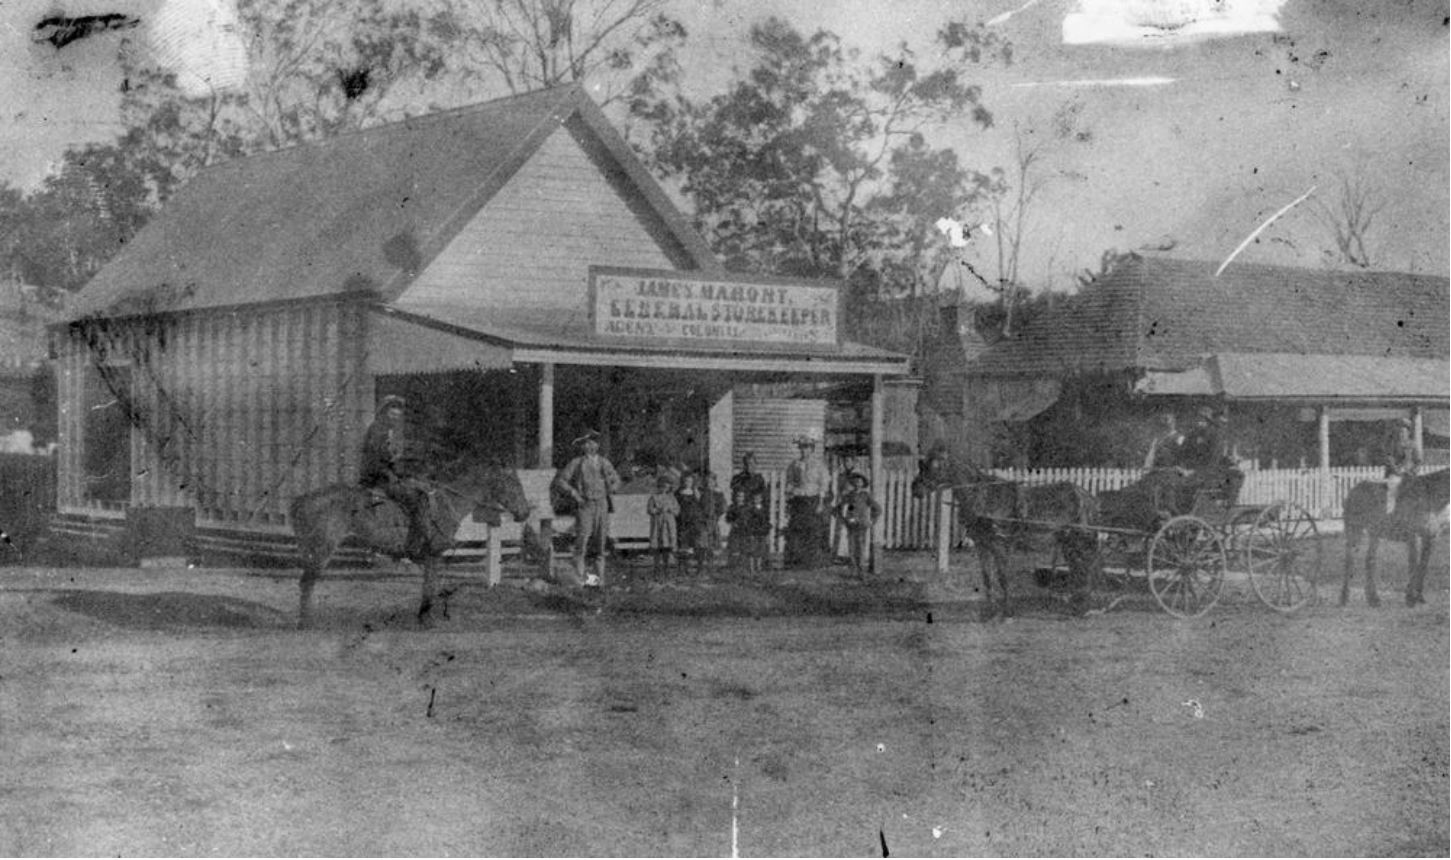 Old black and white photo of James Mahoney Store Leyburn in 1895 with seven people standing outside and one man on a horse